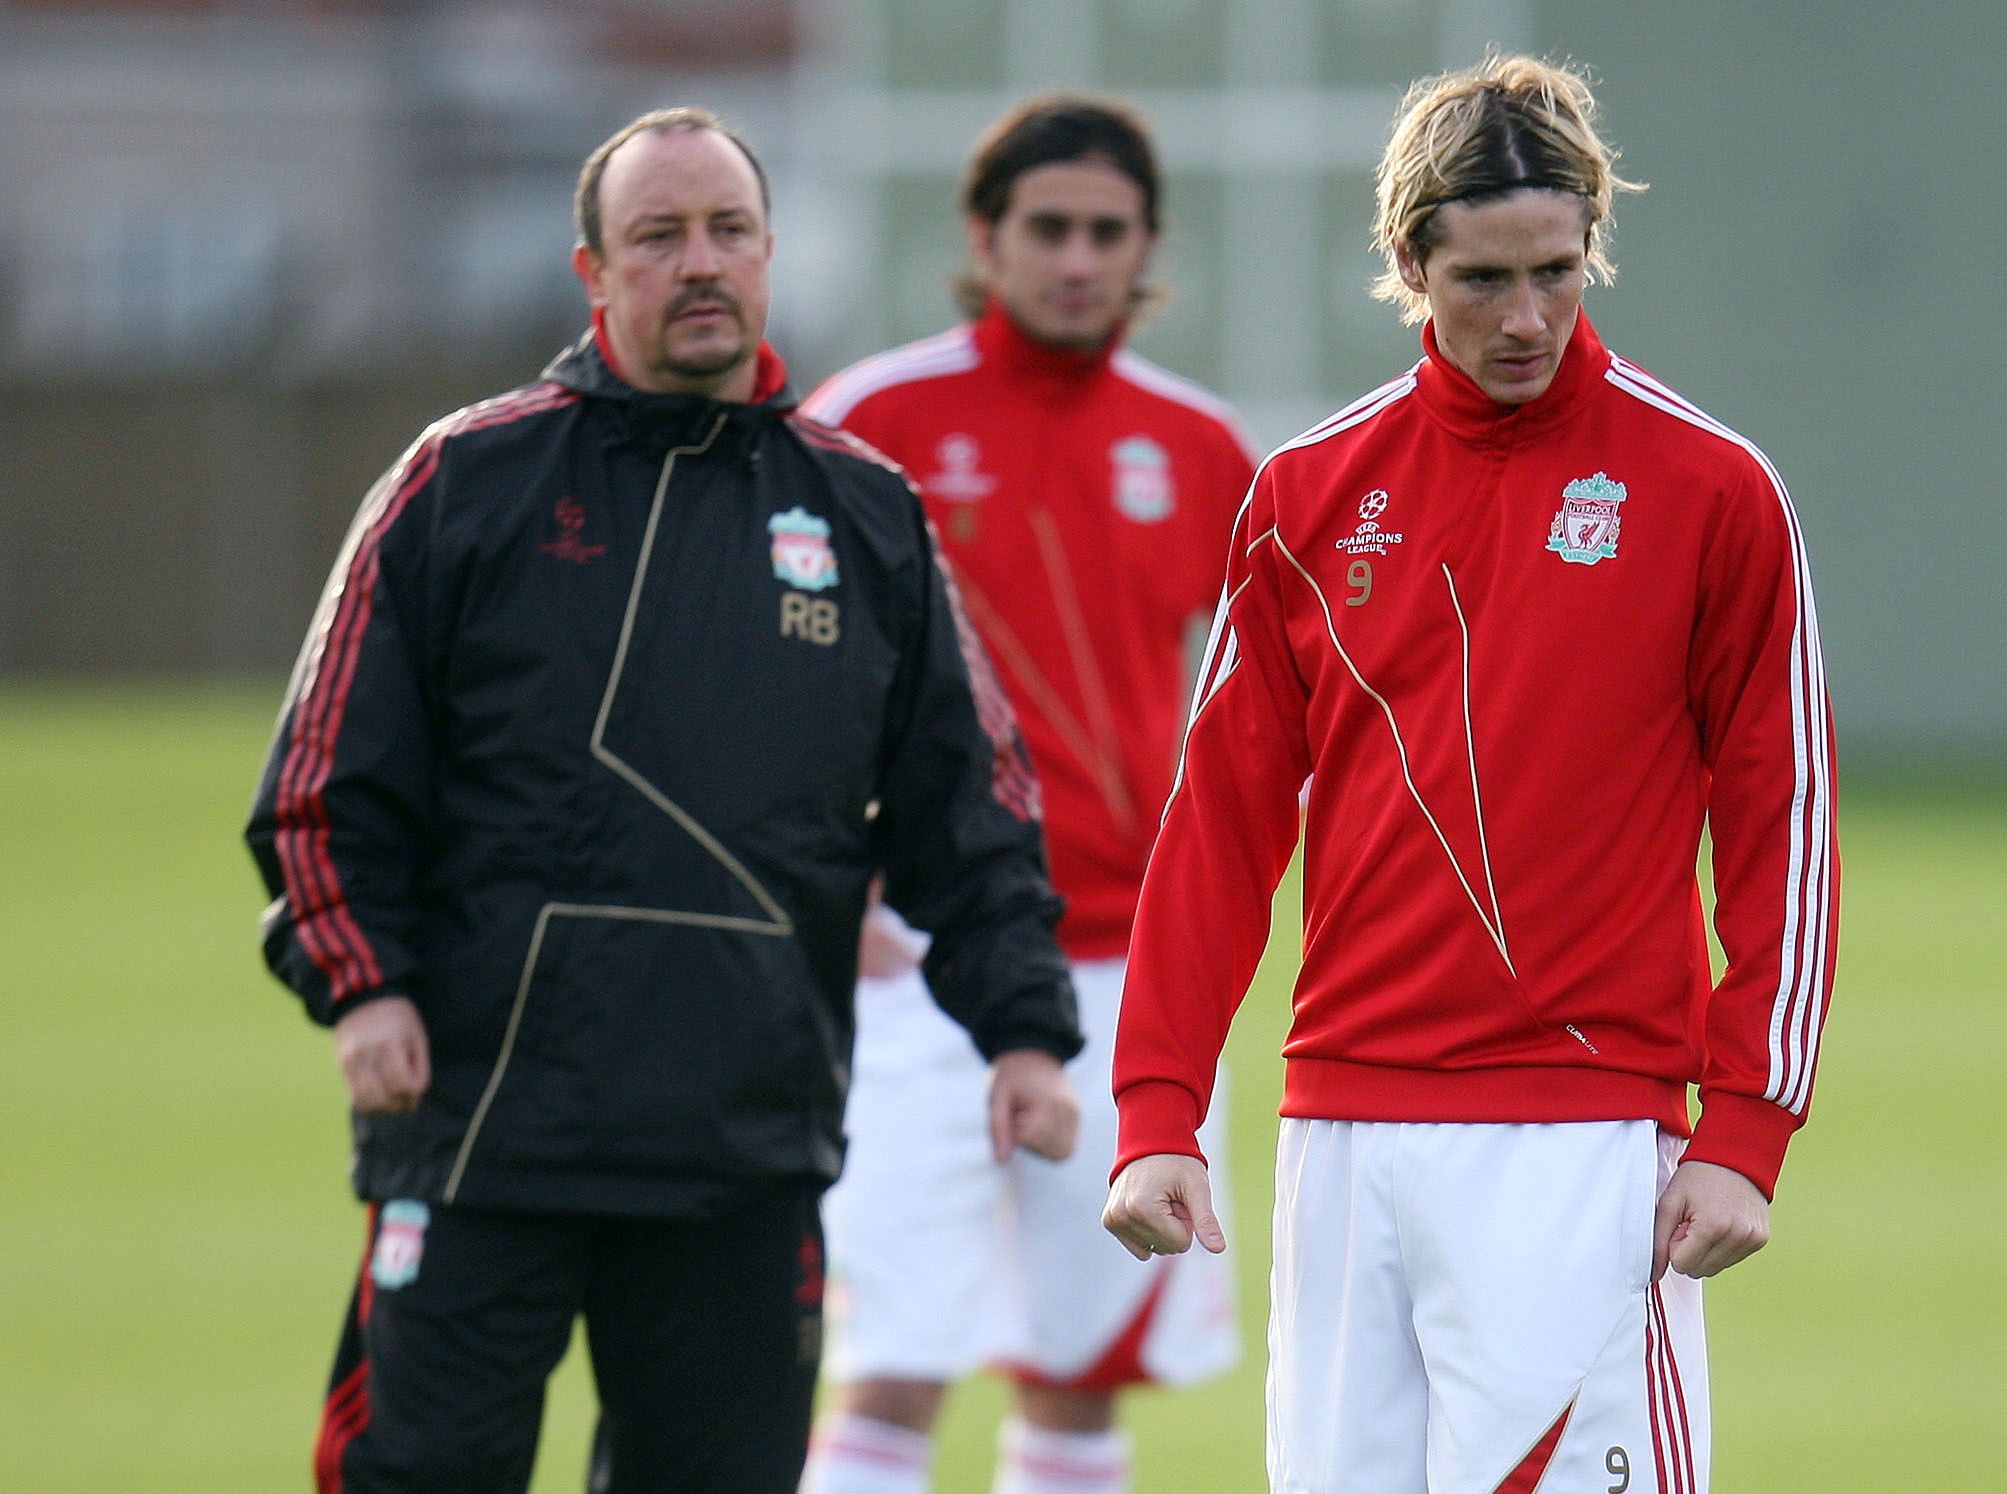 Football - Liverpool Training - Liverpool Training Ground, Liverpool, England - 09/10 - 8/12/09 
(L-R) Liverpool manager Rafael Benitez with Alberto Aquilani and Fernando Torres during training 
Mandatory Credit: Action Images / Carl Recine 
Livepic